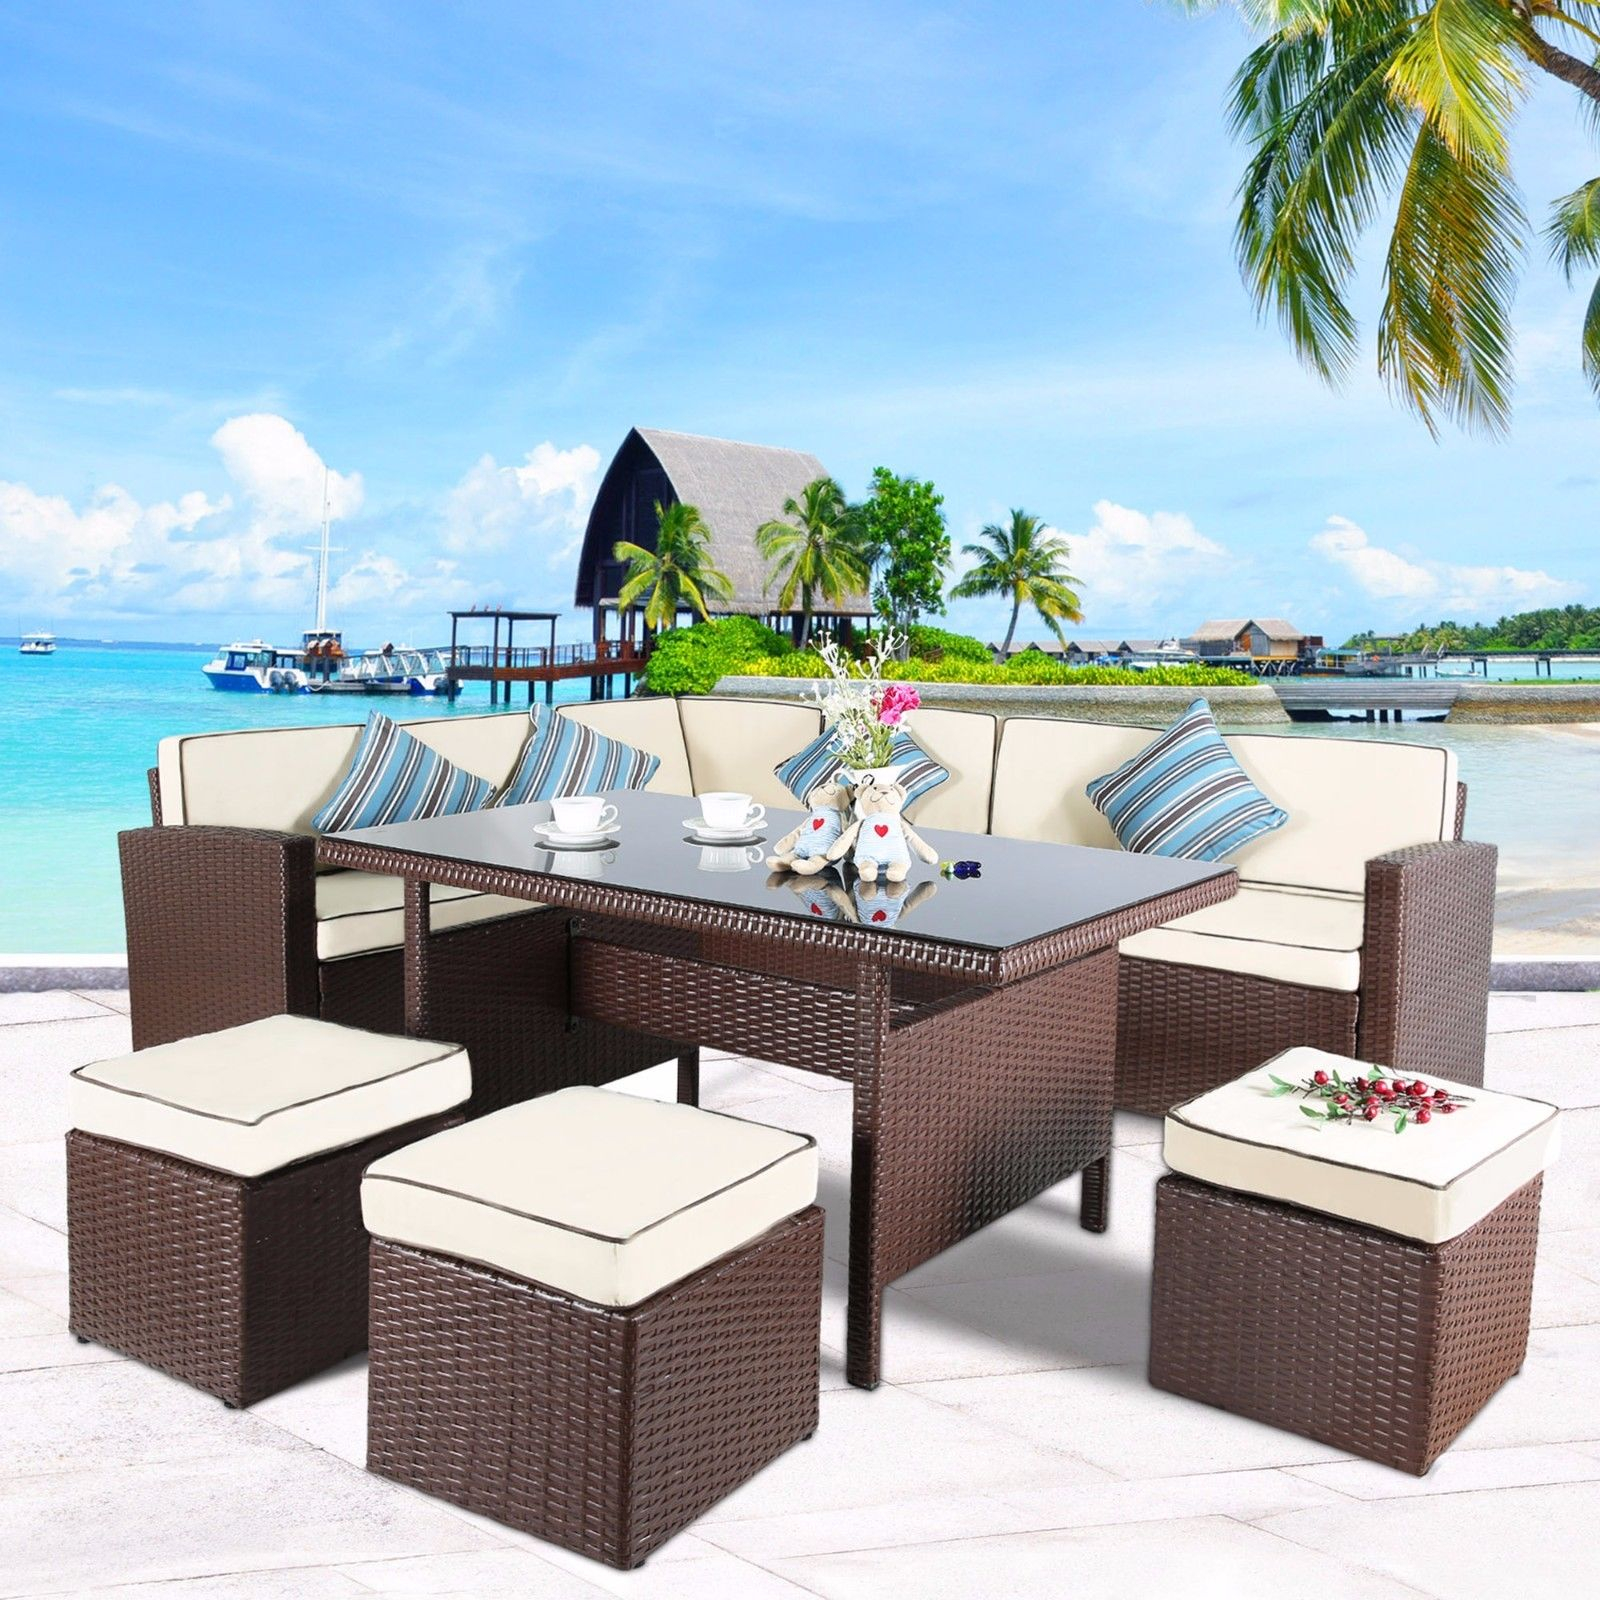 Pc Designs Patio And Rattan 28 Images New 8 Pc Outdoor Garden throughout dimensions 1600 X 1600